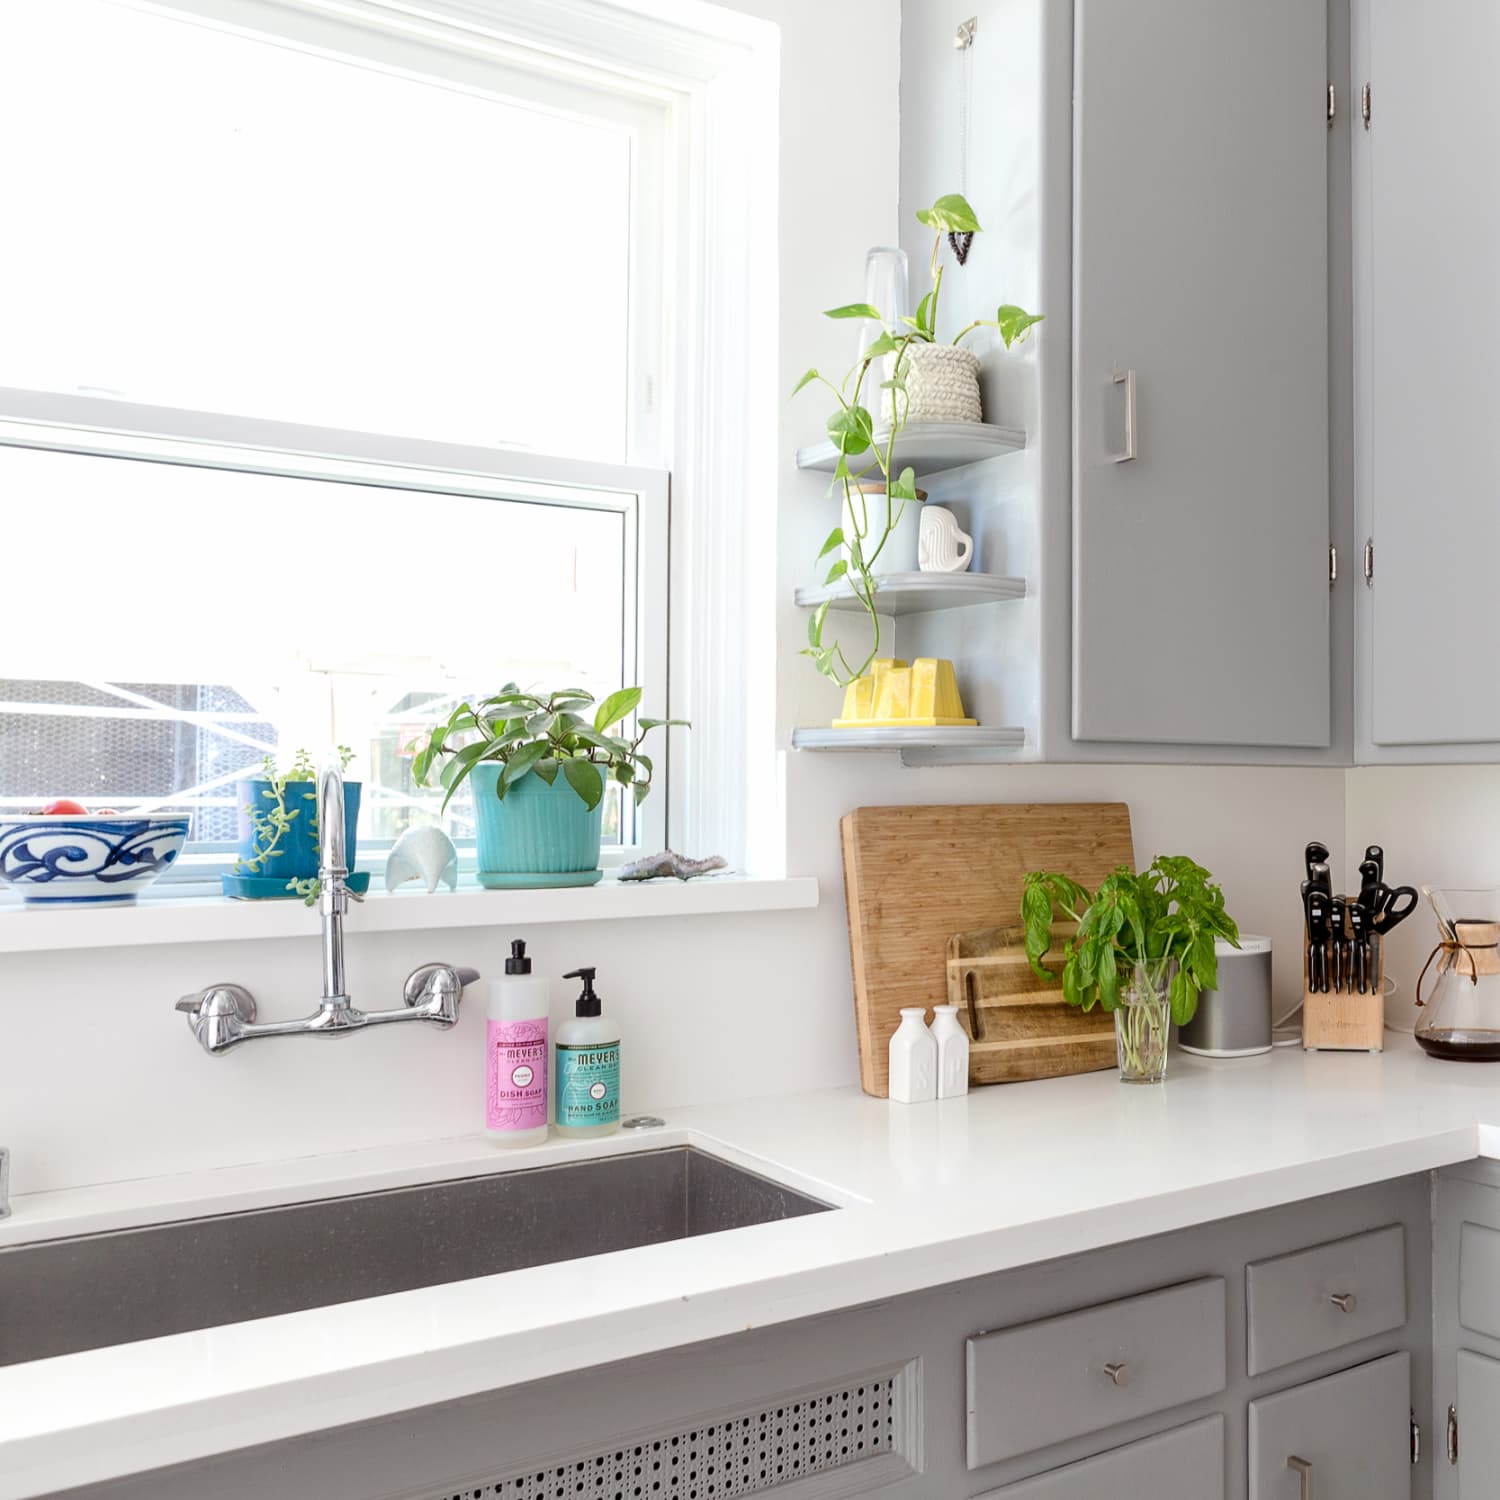 5 Smart Ways To Use Your Kitchen Window For Extra Storage Kitchn